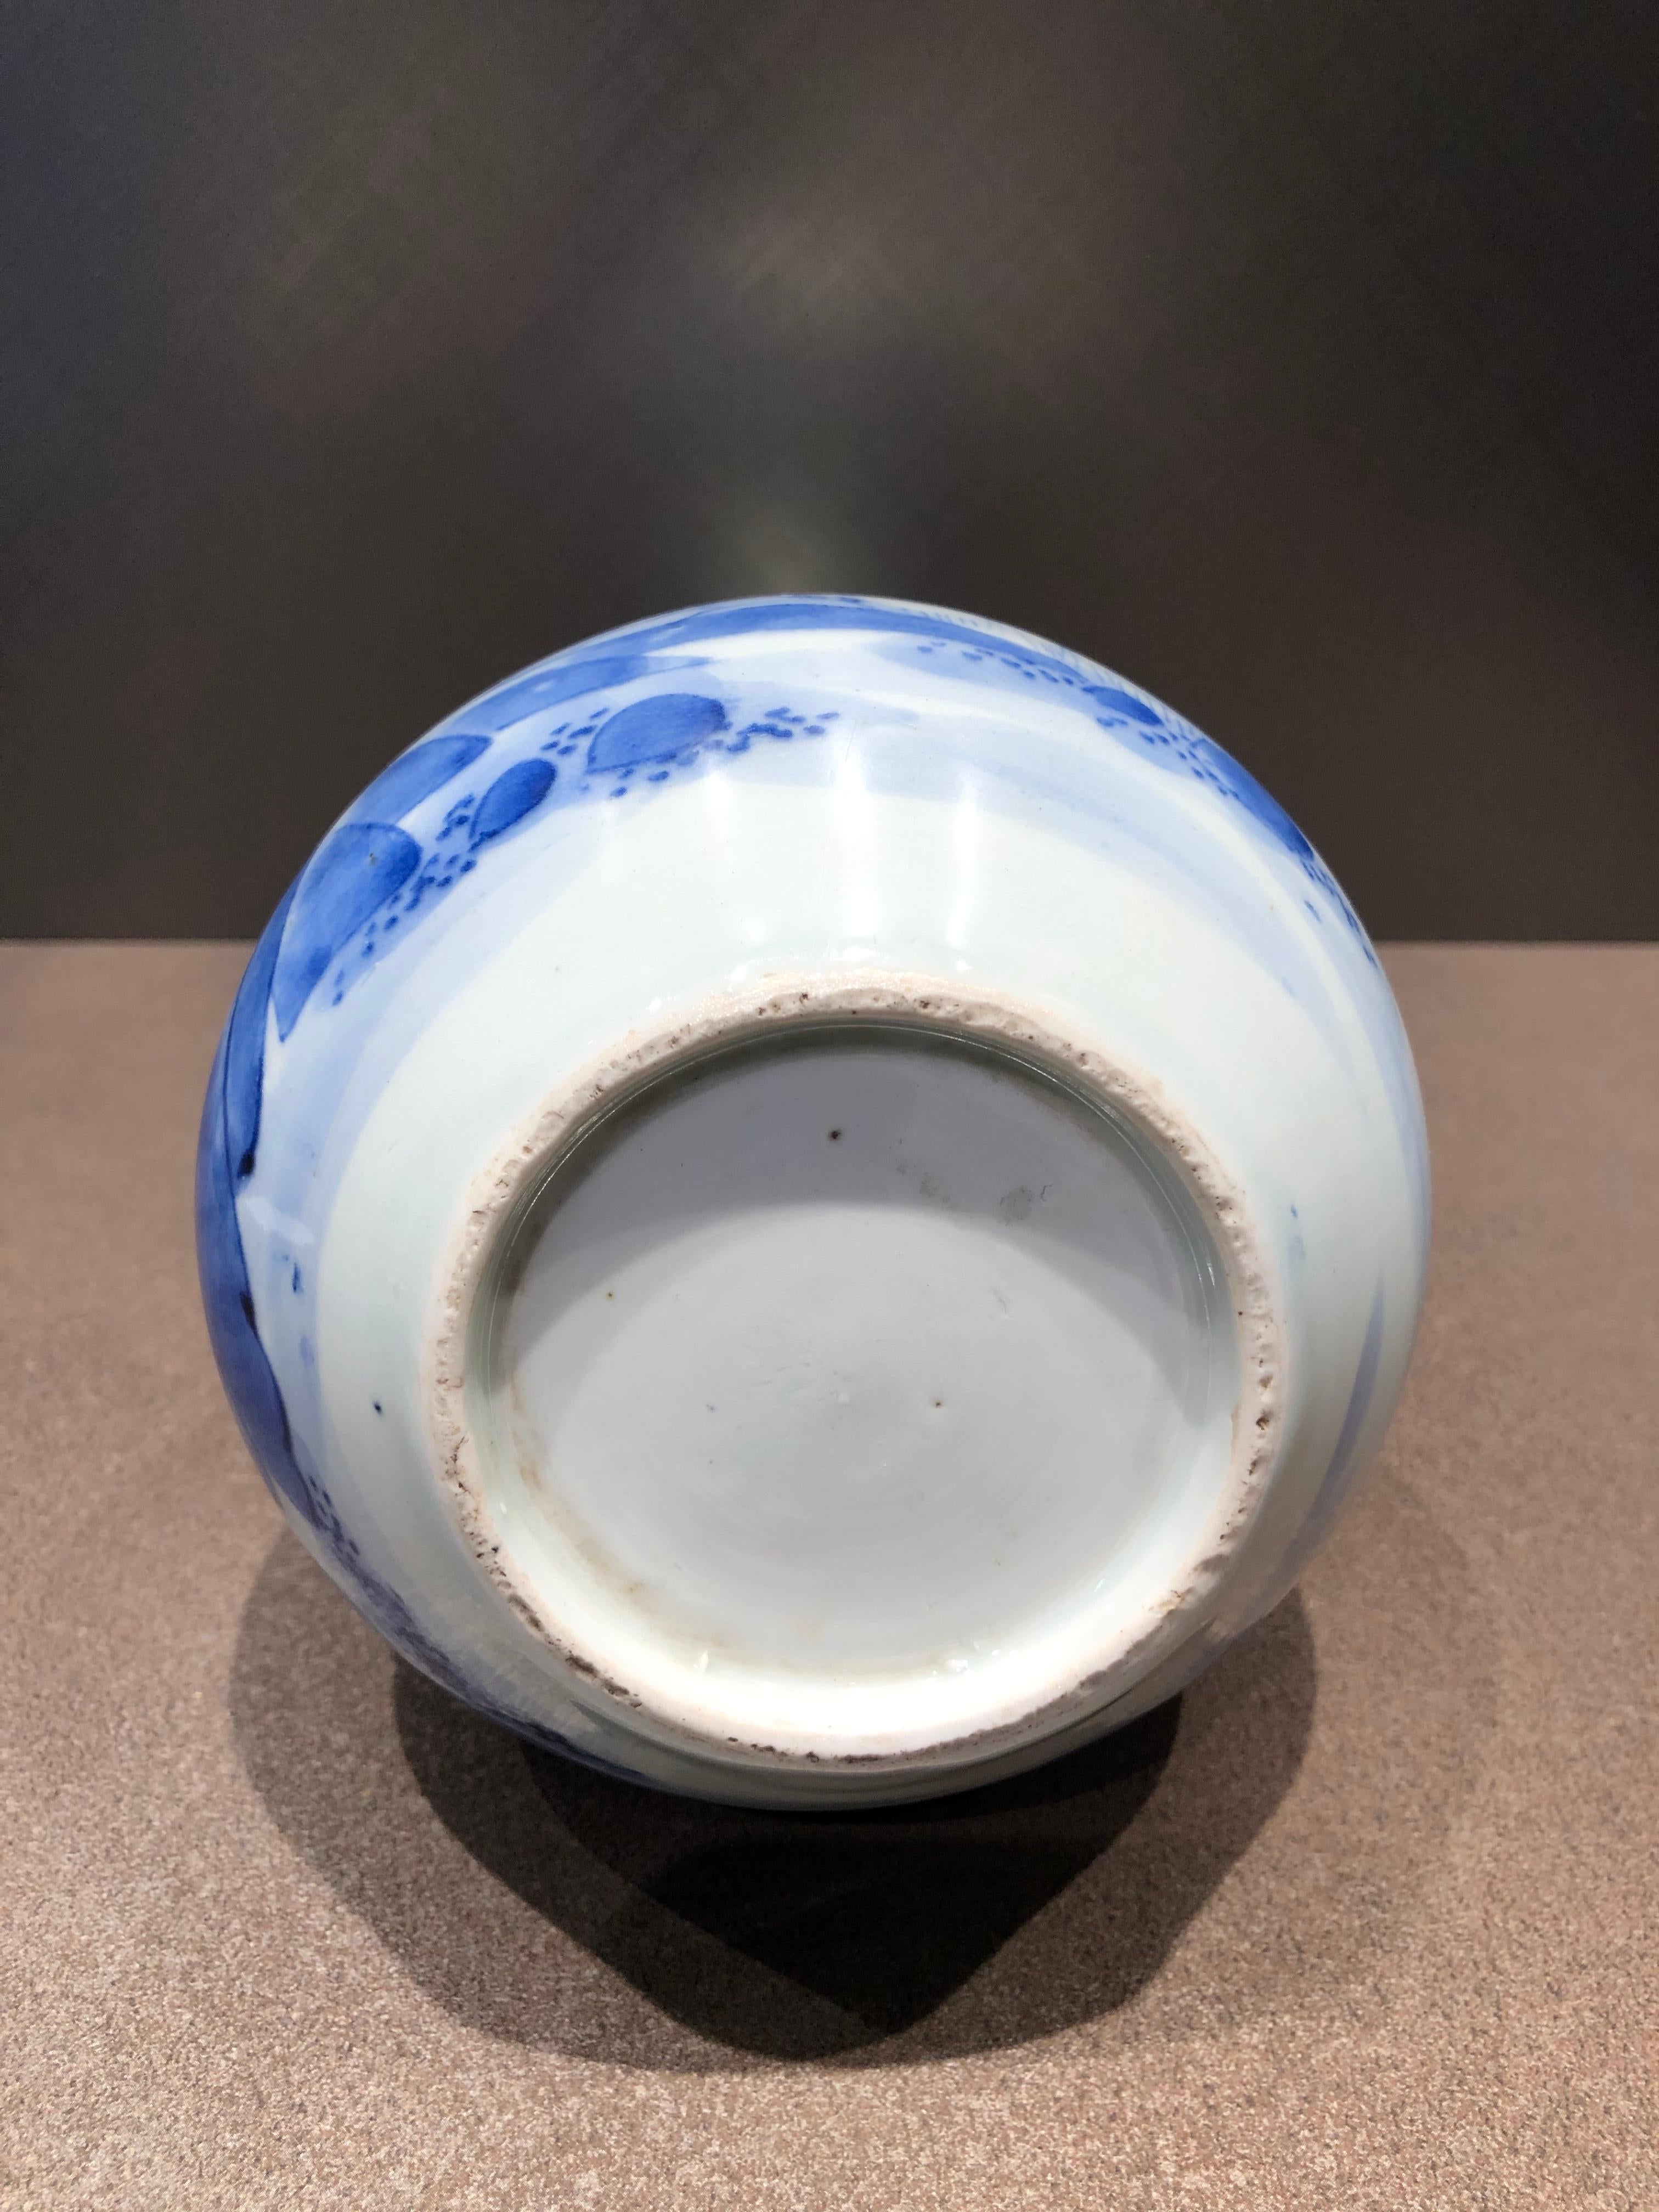 Imari Porcelain With Hand-Painted Landscape design, Edo Period In Fair Condition For Sale In Chuo-ku, Tokyo